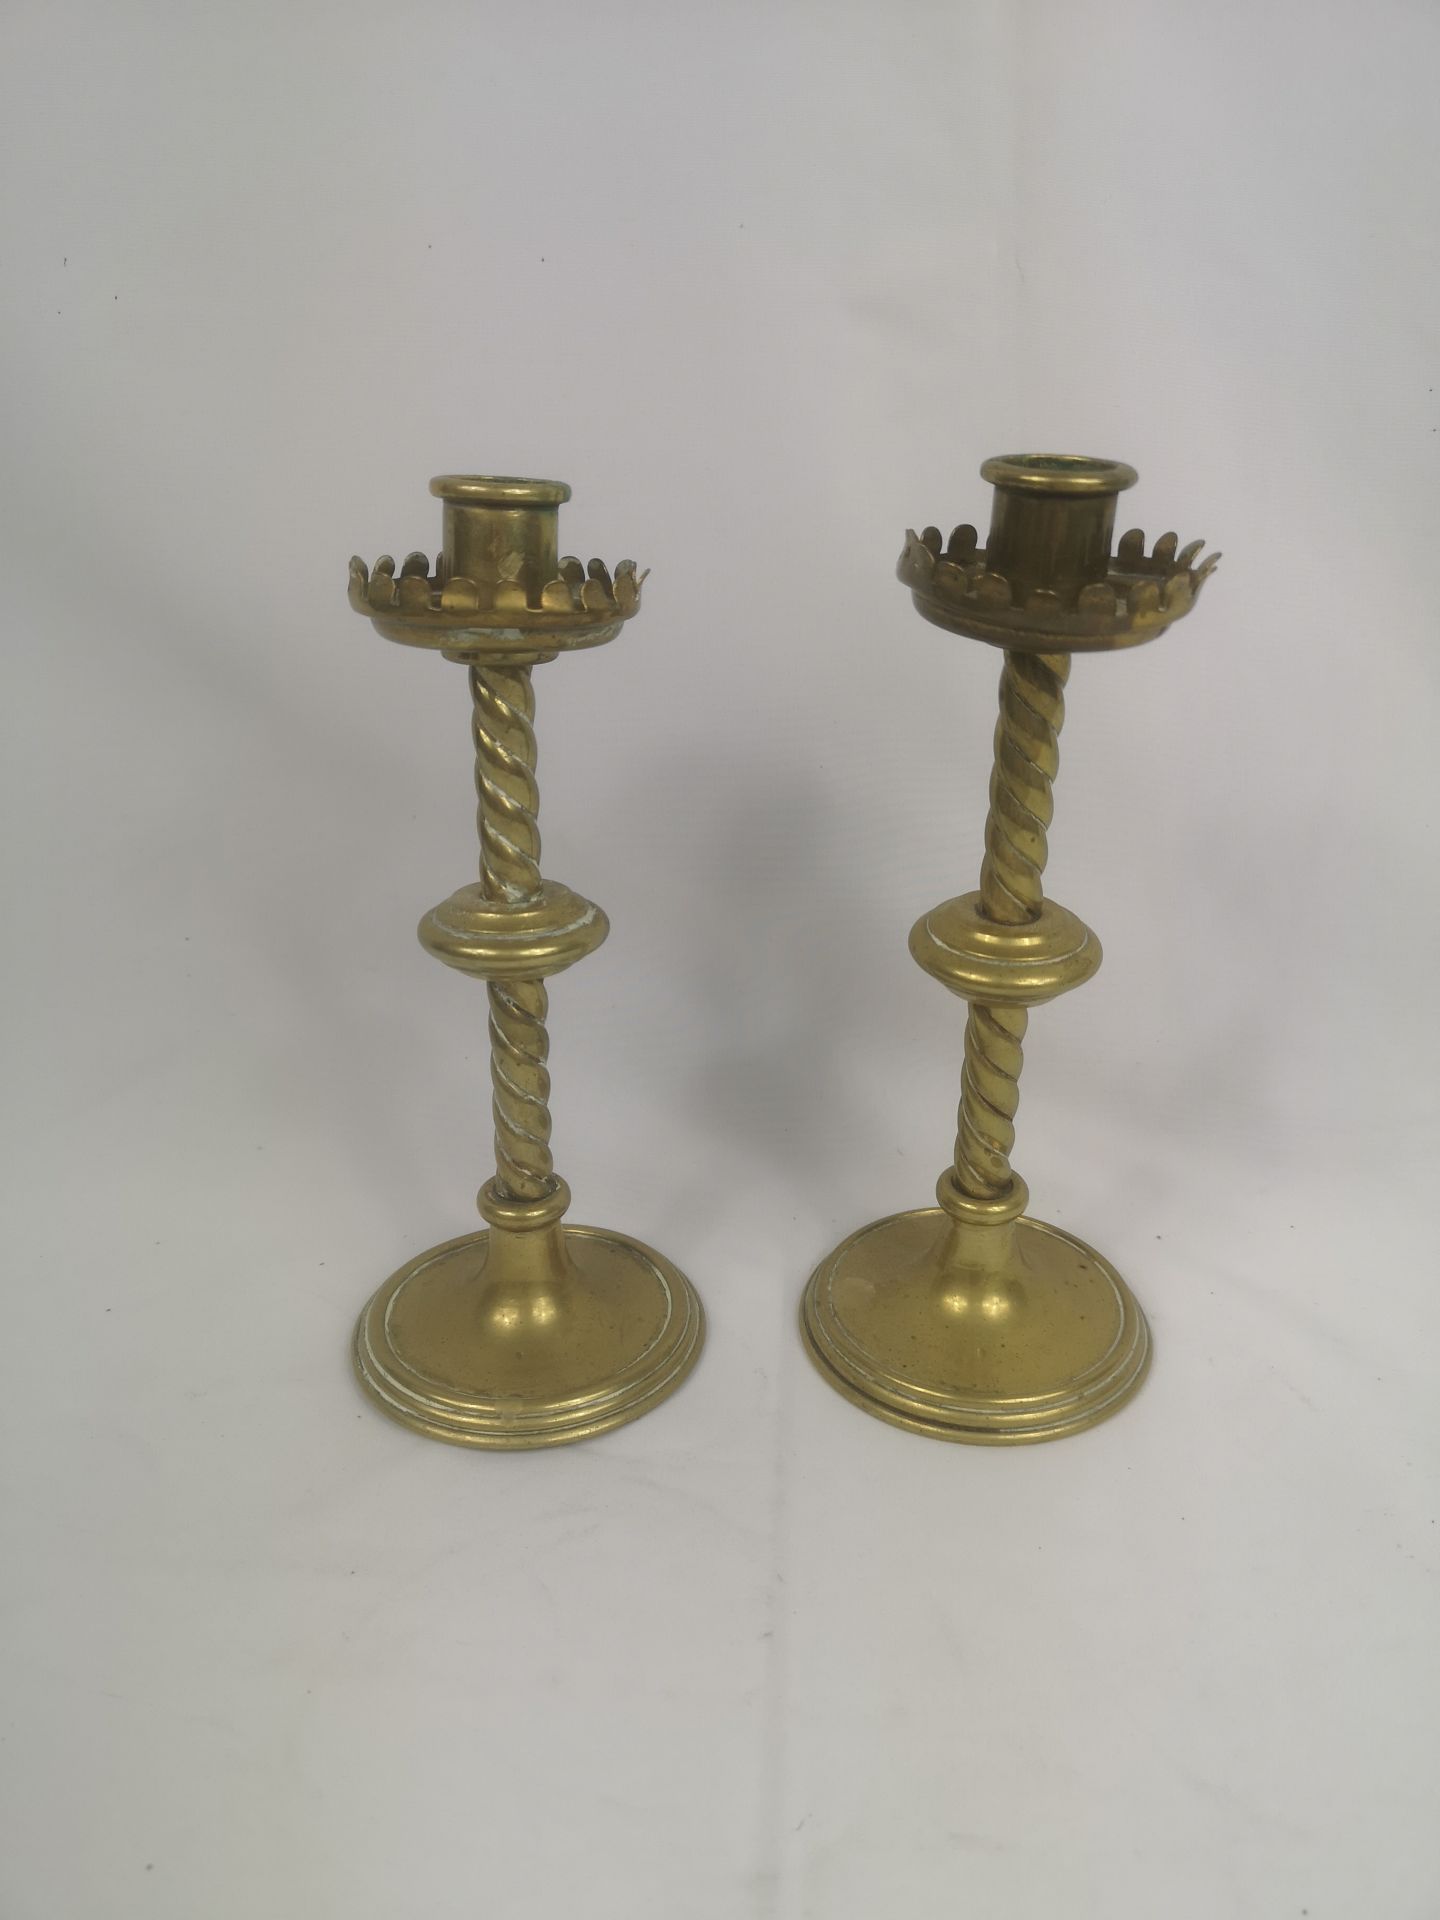 Victorian copper coal scuttle, copper jelly mould and pair of brass candlesticks - Image 2 of 4